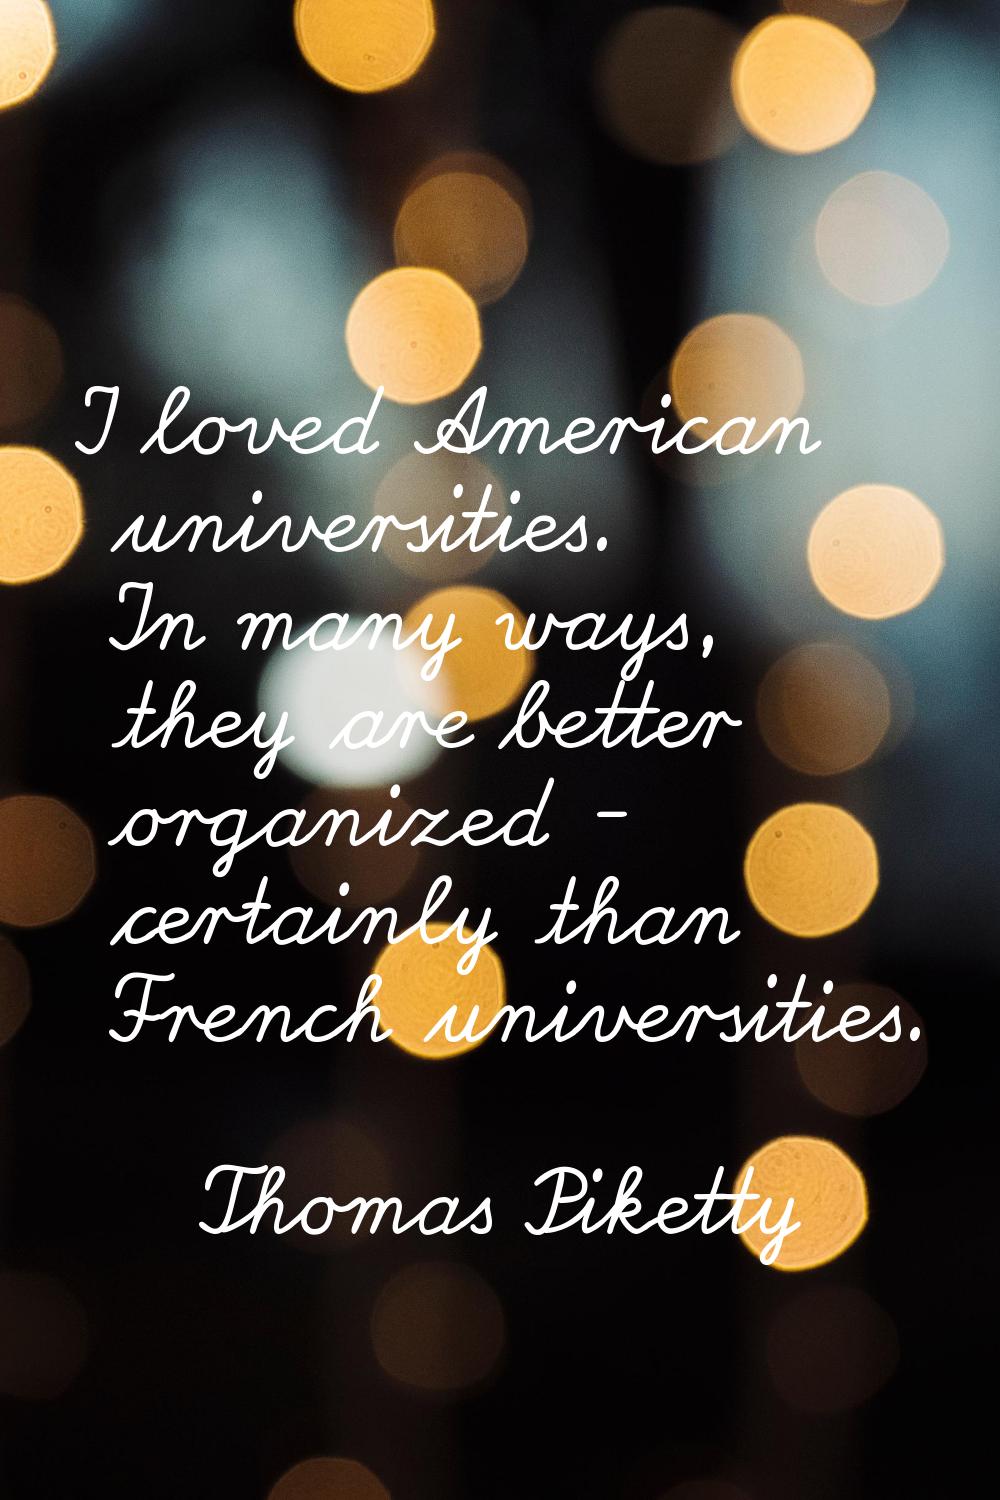 I loved American universities. In many ways, they are better organized - certainly than French univ